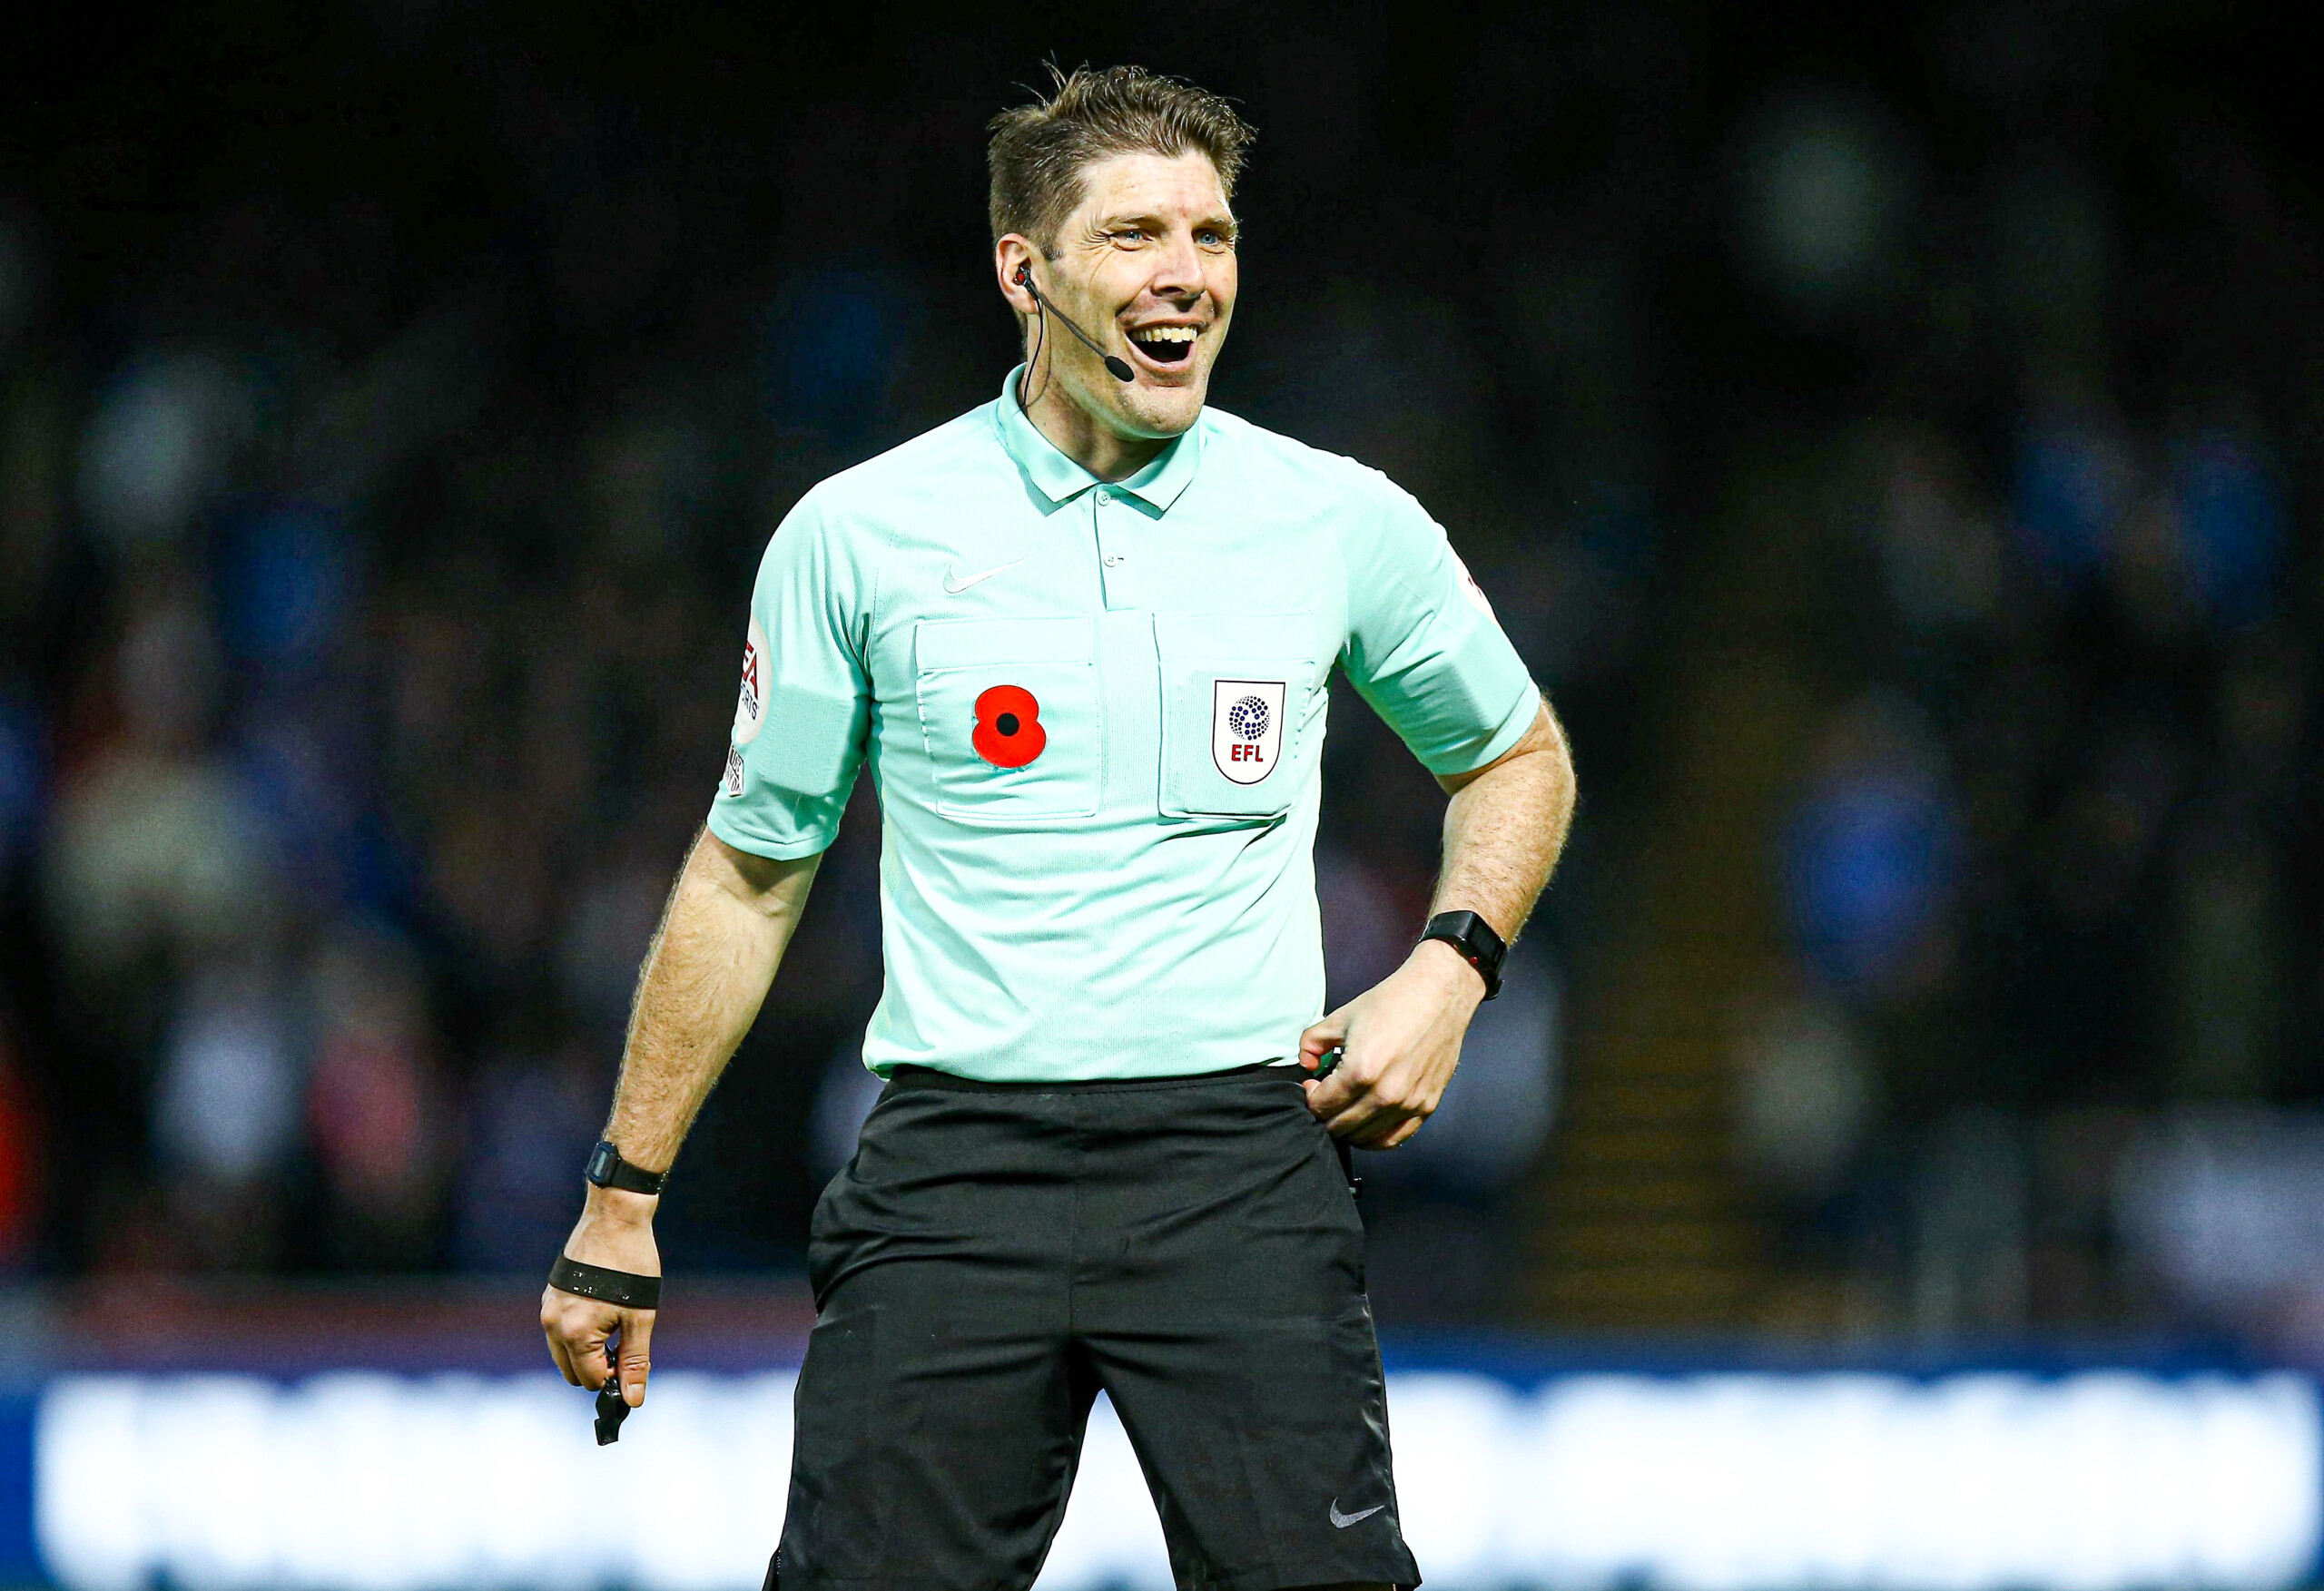 FA Referee Department And PGMOL Relaunch Player to Referee Pathway Course